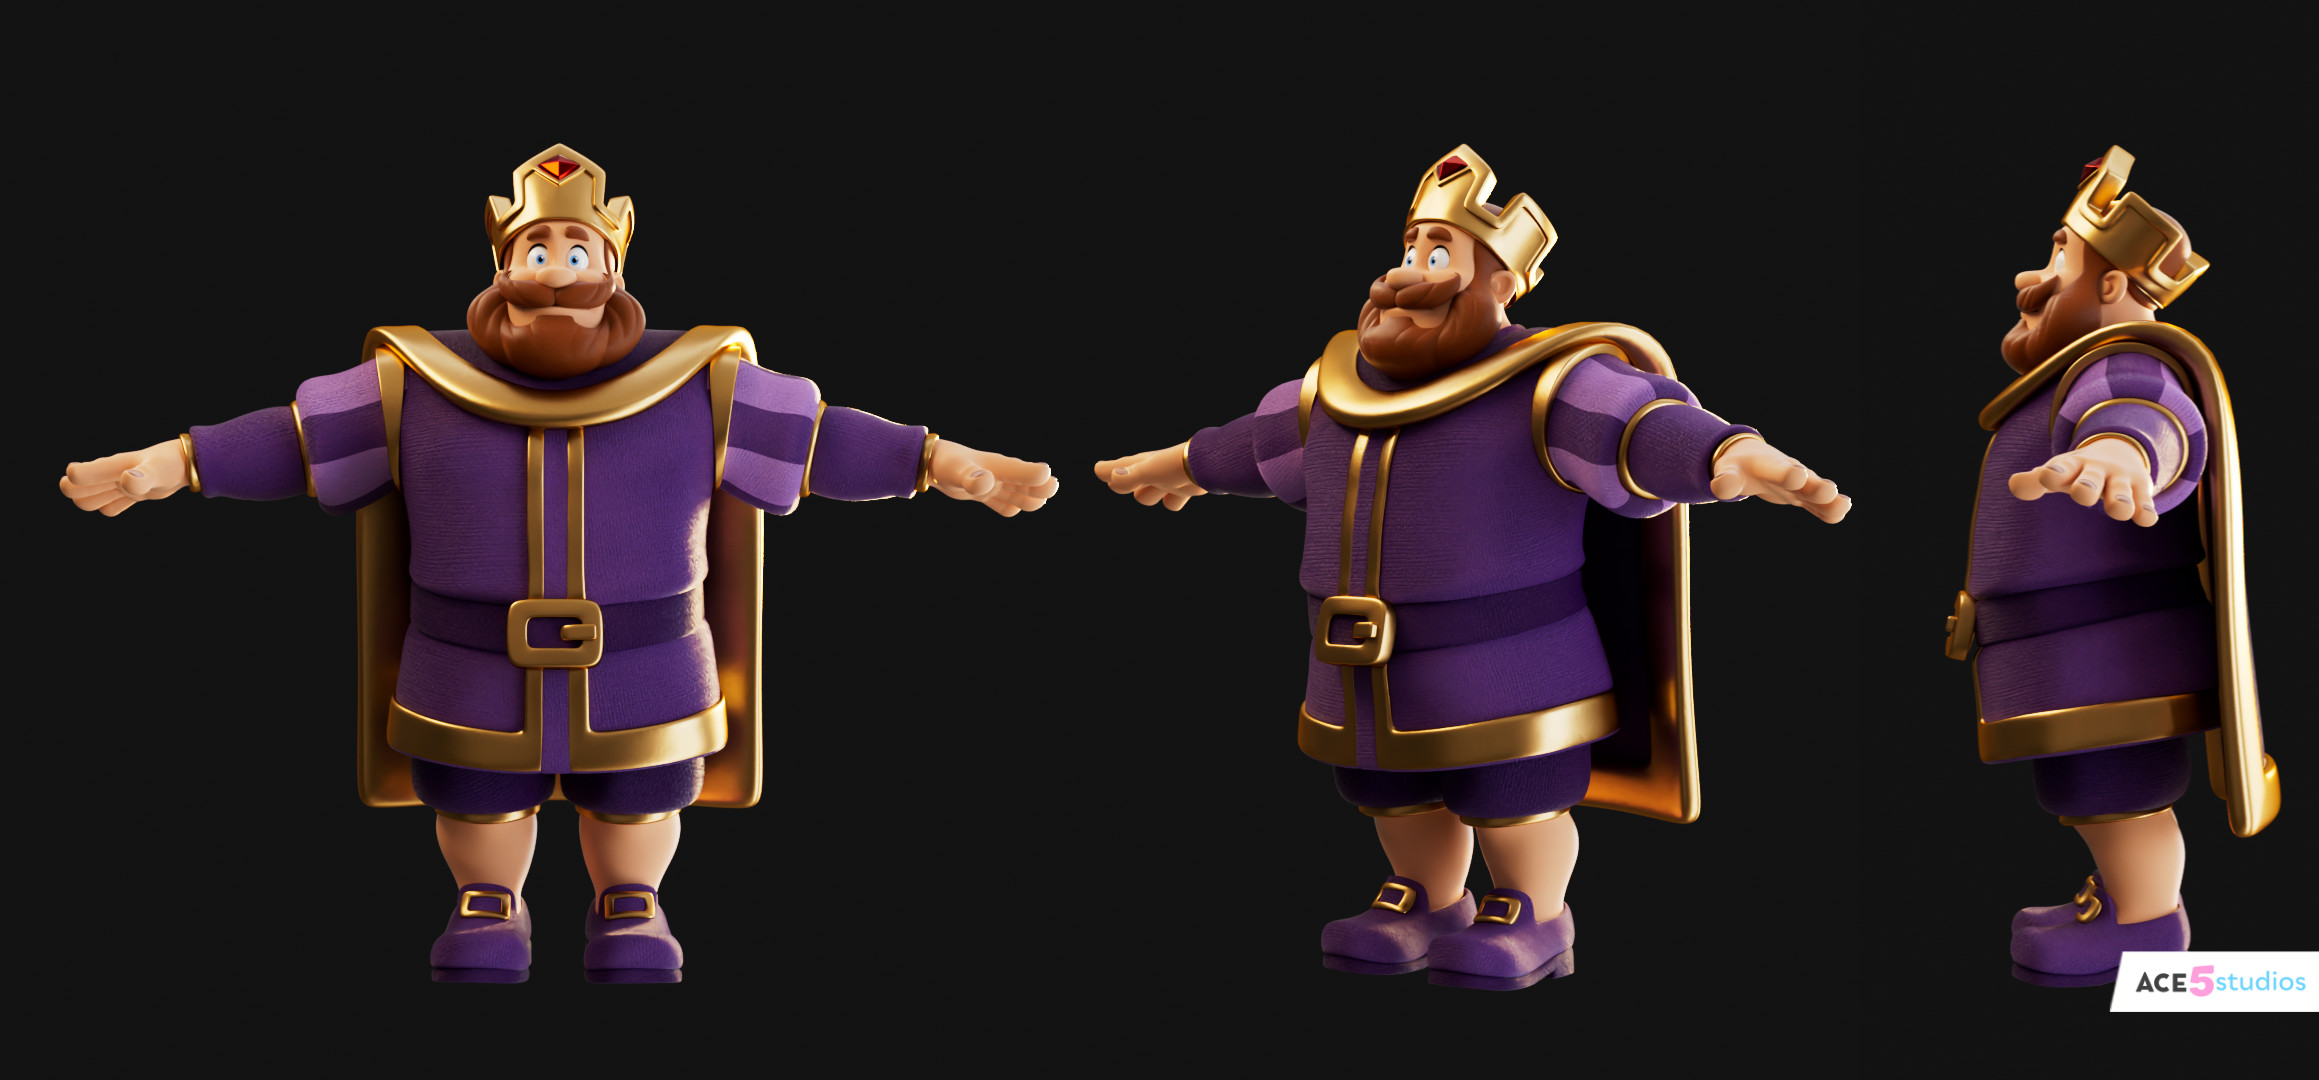 c4d King character 3d model rigged in Cinema 4d. Animation ready. Mograph king. face rig, mocap ready